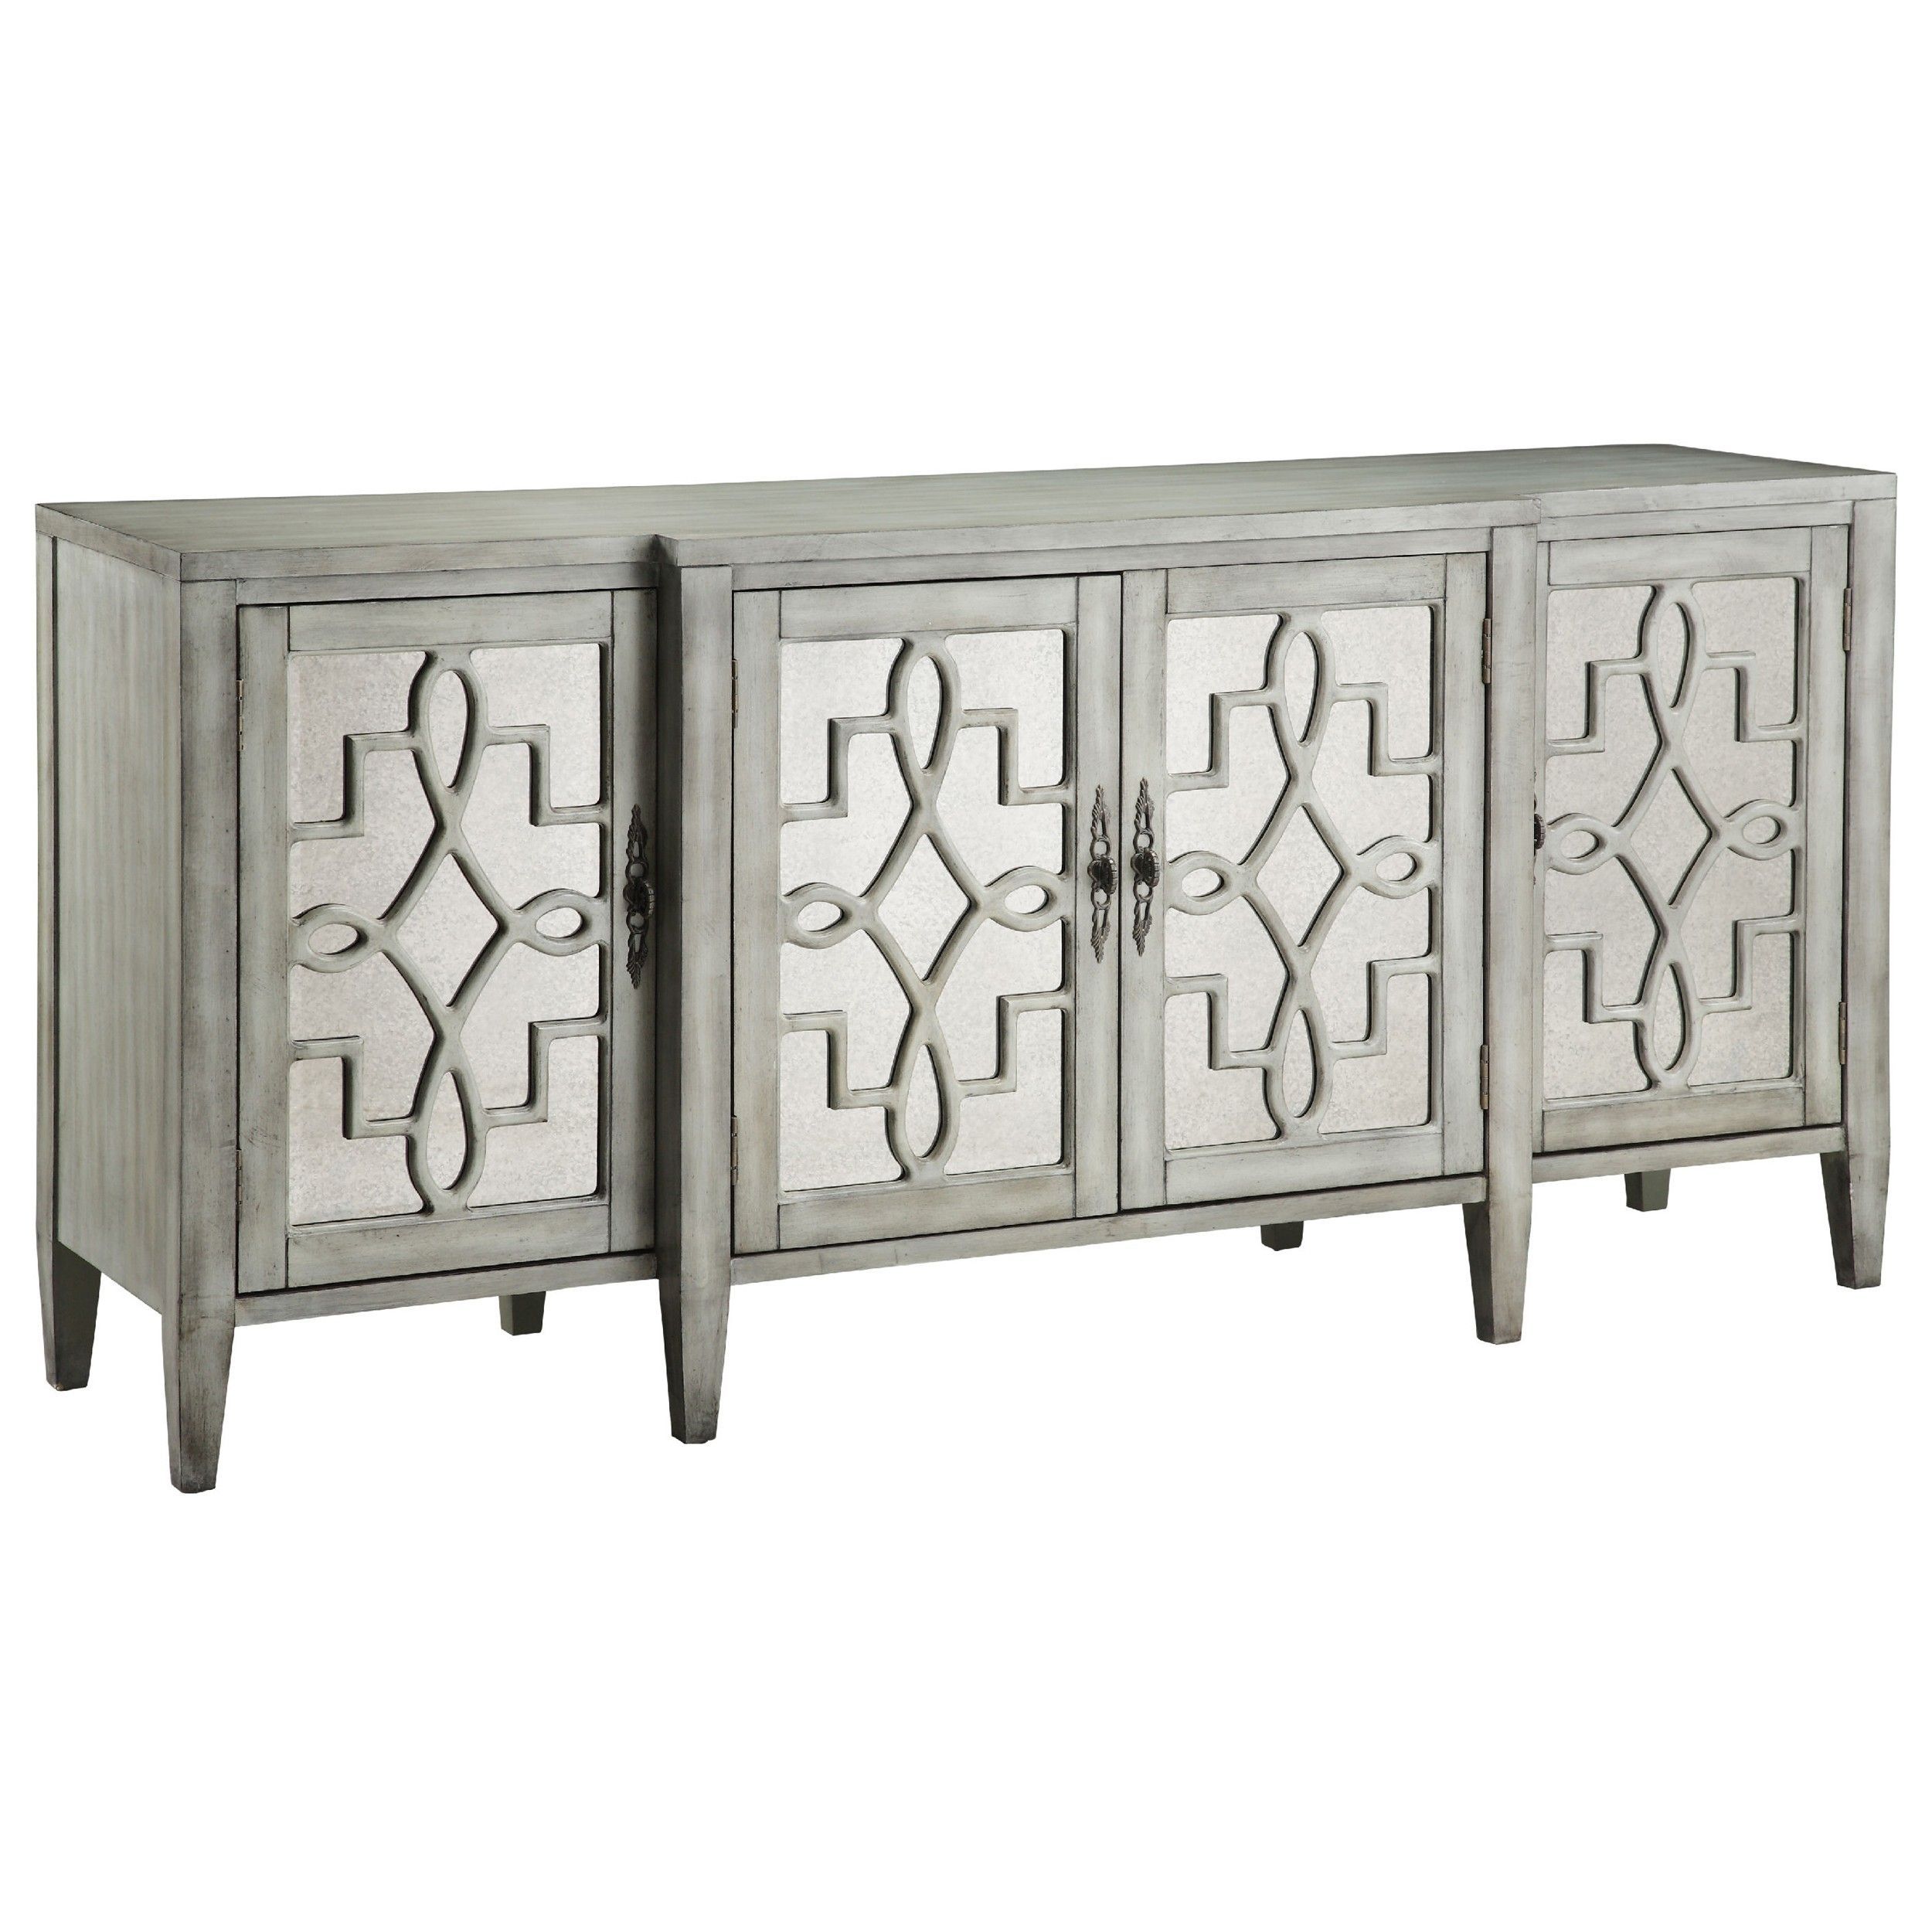 Isabelle Credenza | Furnishings | Pinterest | Credenza, Sideboard In Aged Mirrored 4 Door Sideboards (View 5 of 30)